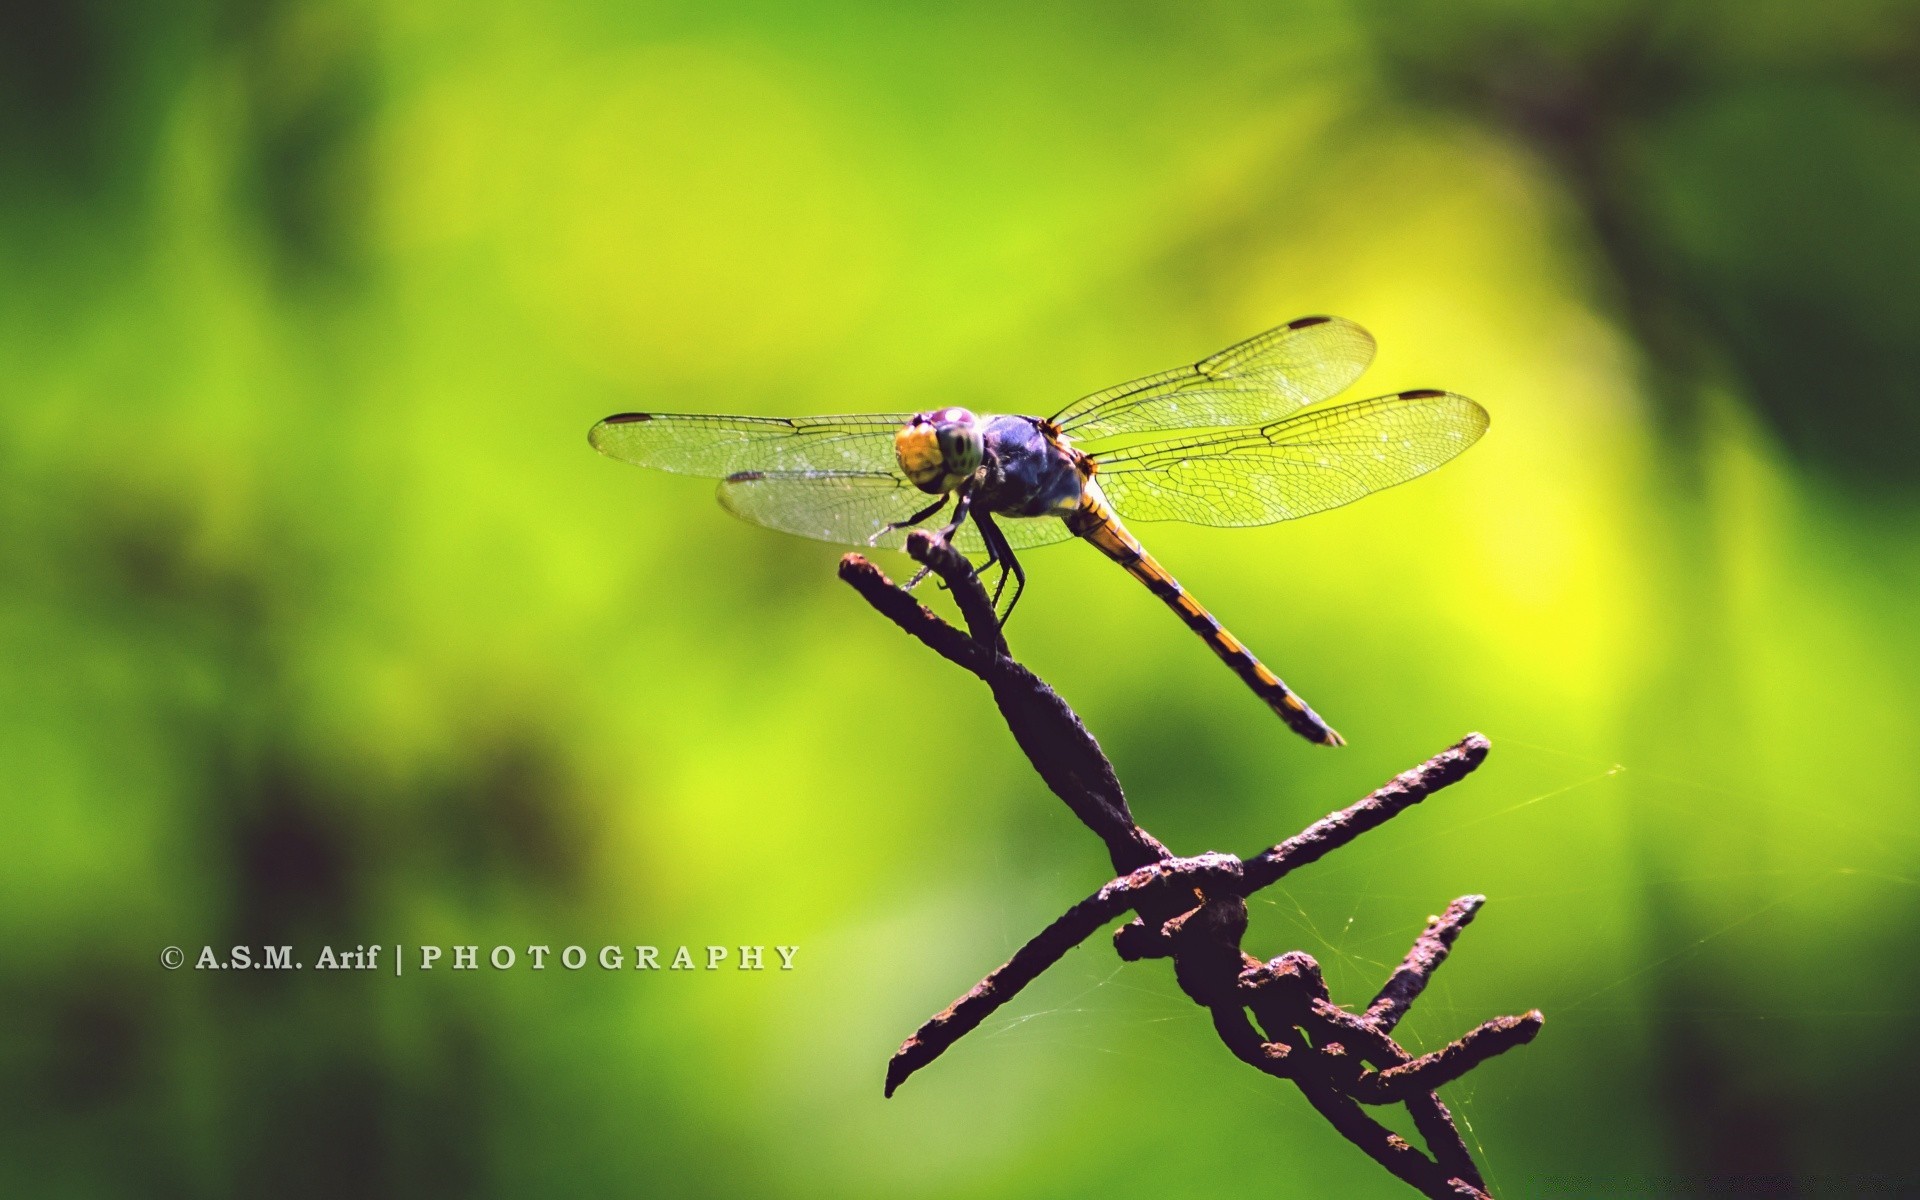 insects nature insect dragonfly leaf wildlife animal fly summer grass little